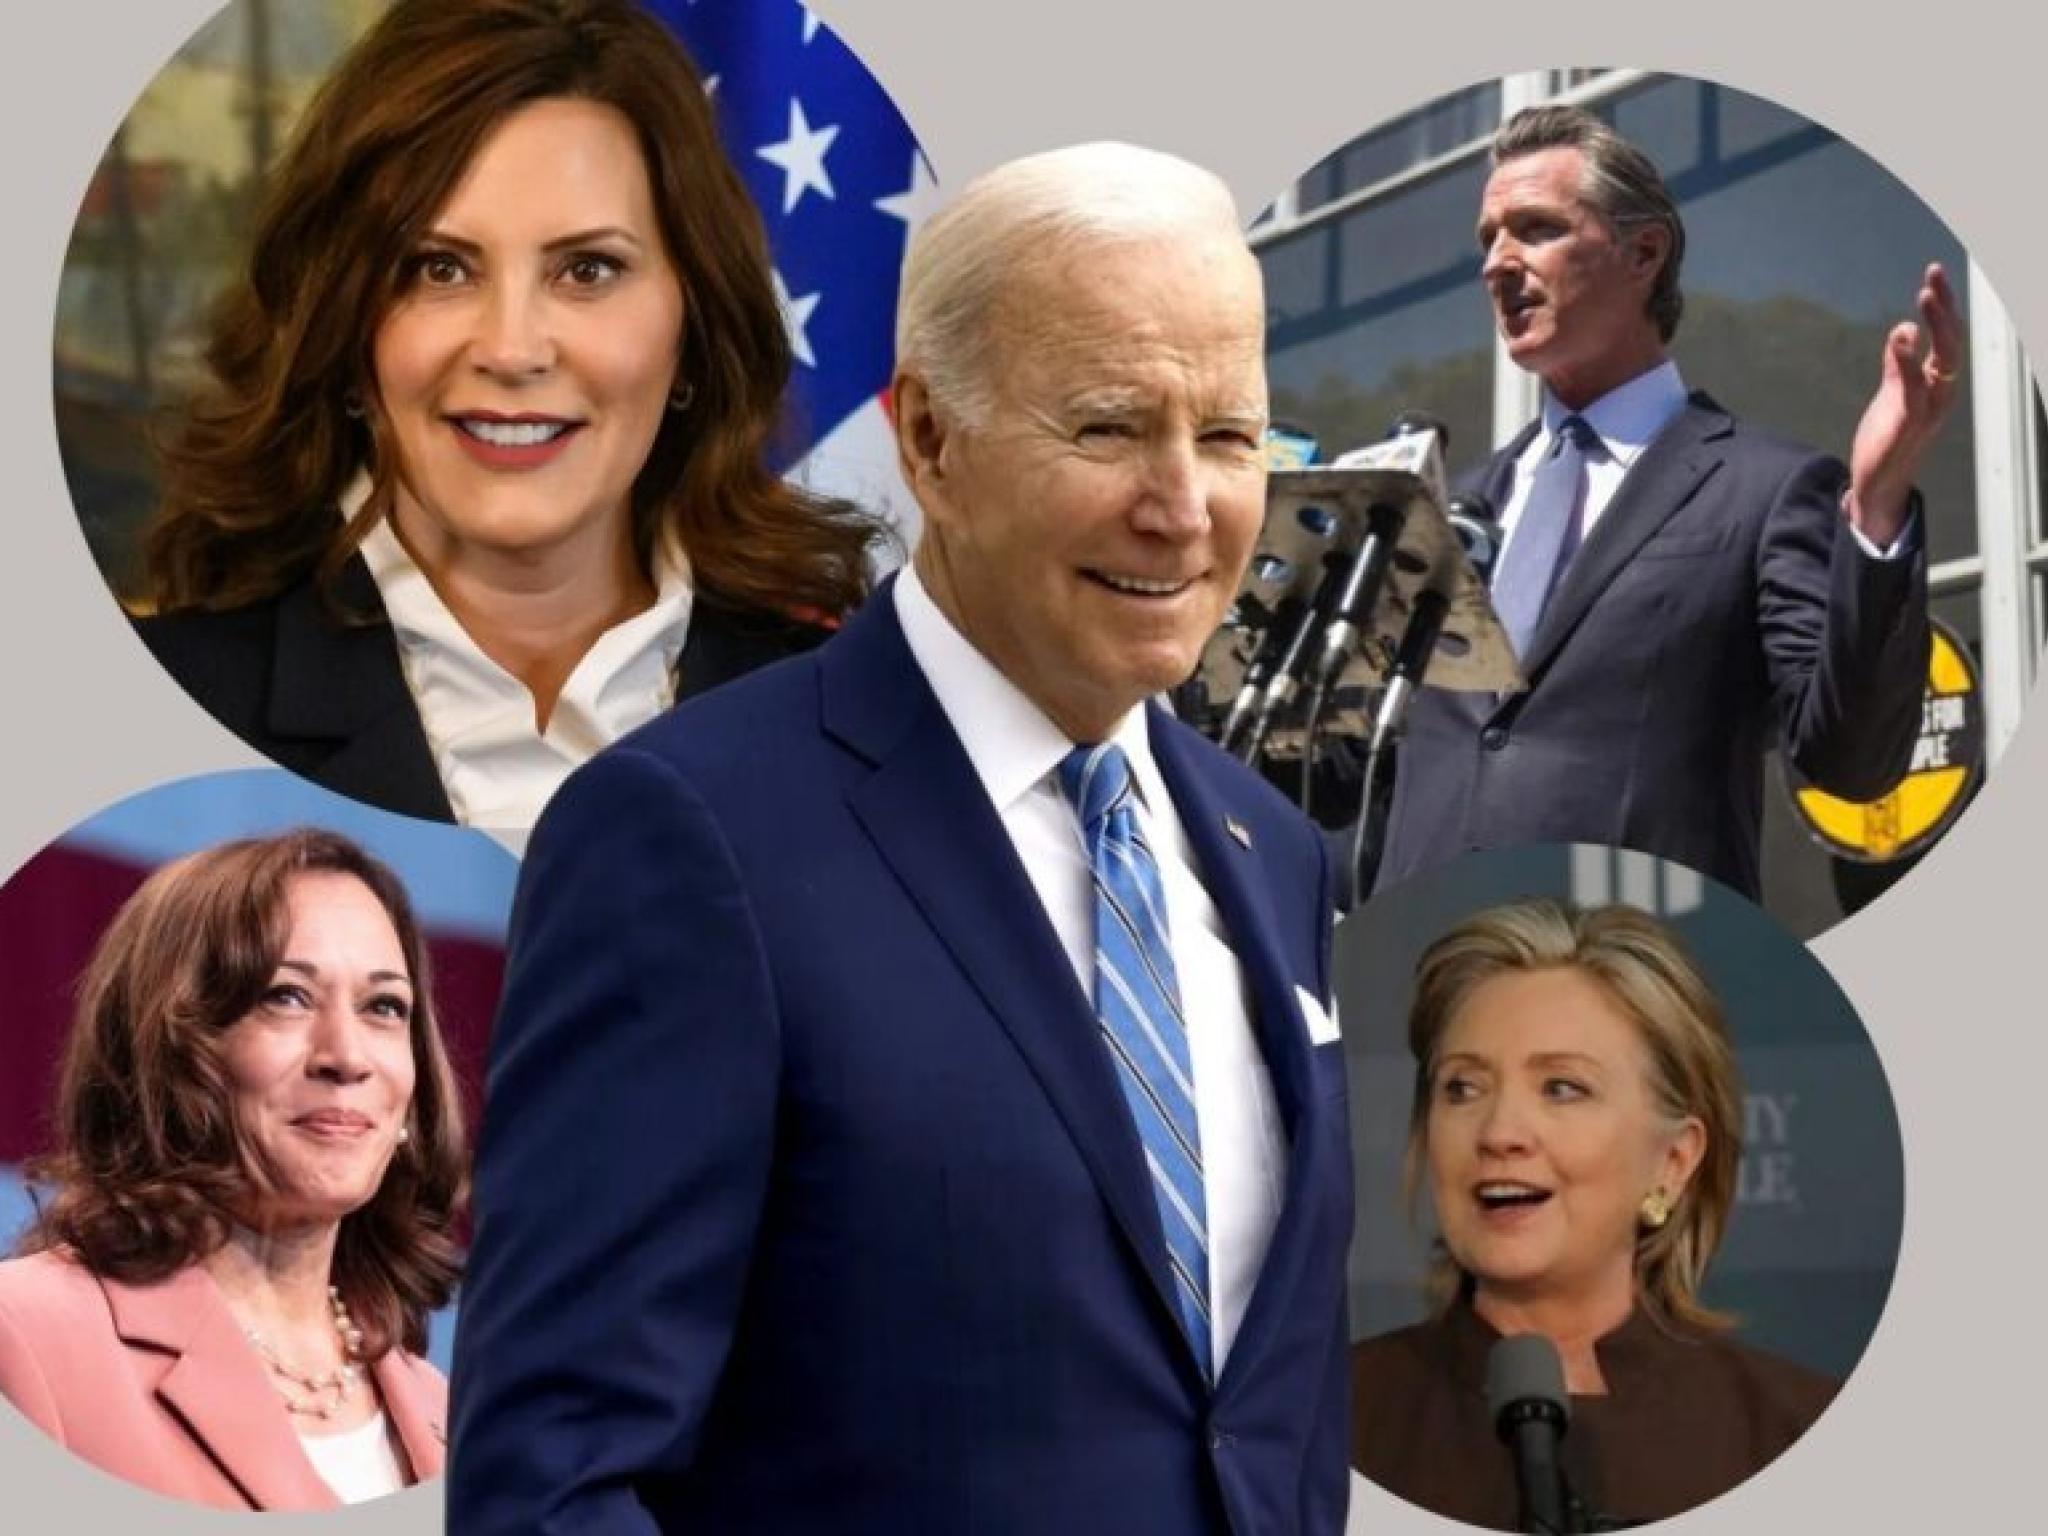  joe-biden-to-be-replaced-in-2024-election-newsom-tops-democrat-wish-list-betting-odds-but-says-weve-got-to-have-the-back-of-this-president 